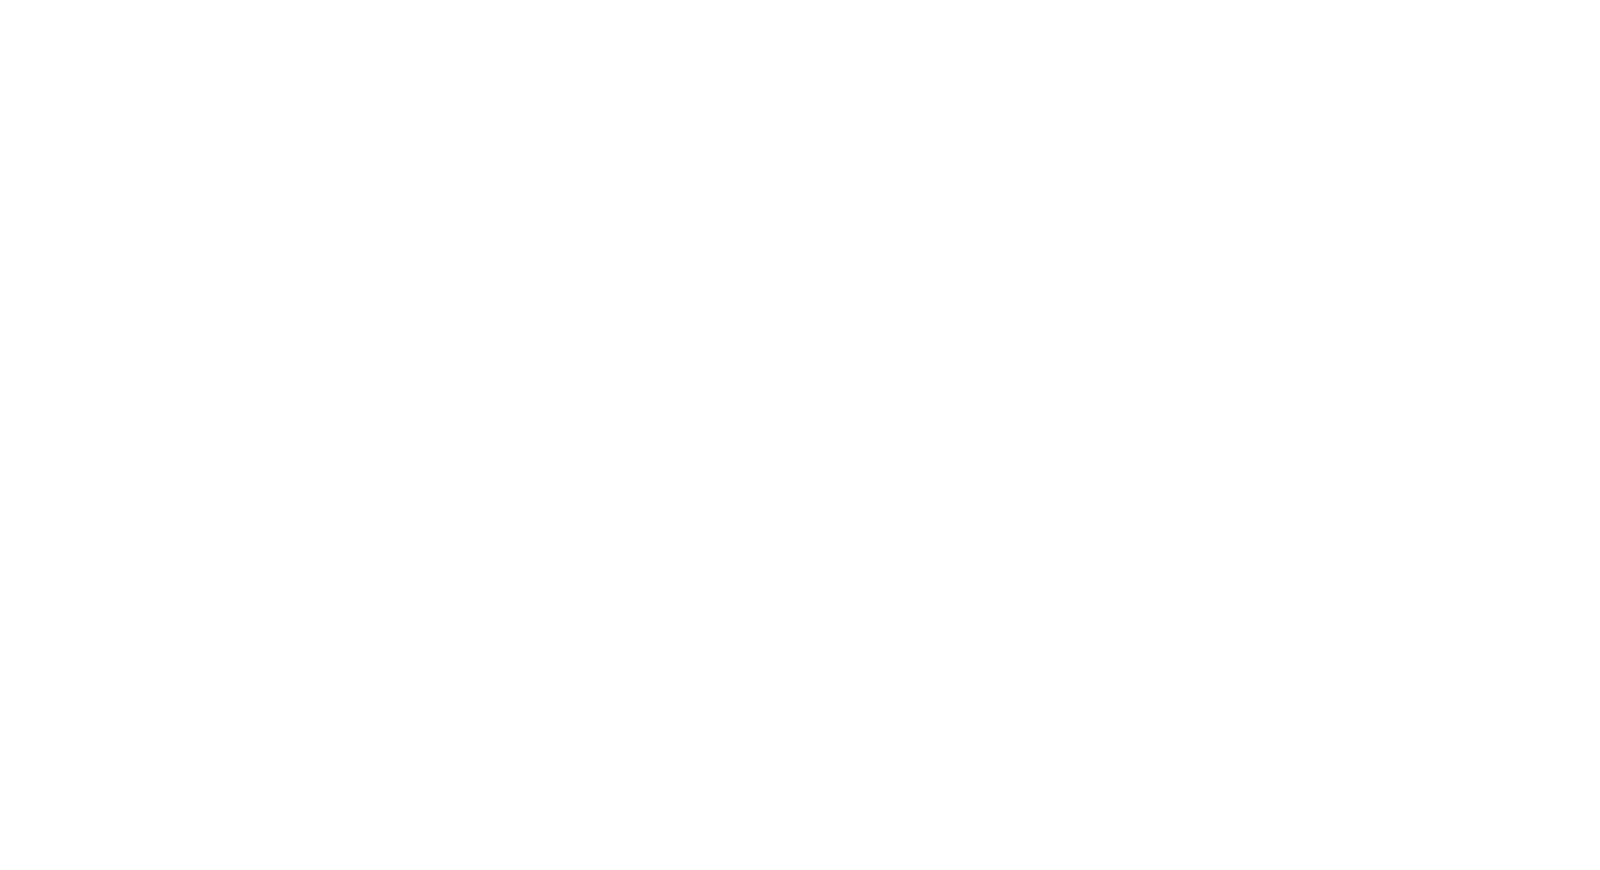 The Greasy Spoon Soulfood Bistro | Houston TX